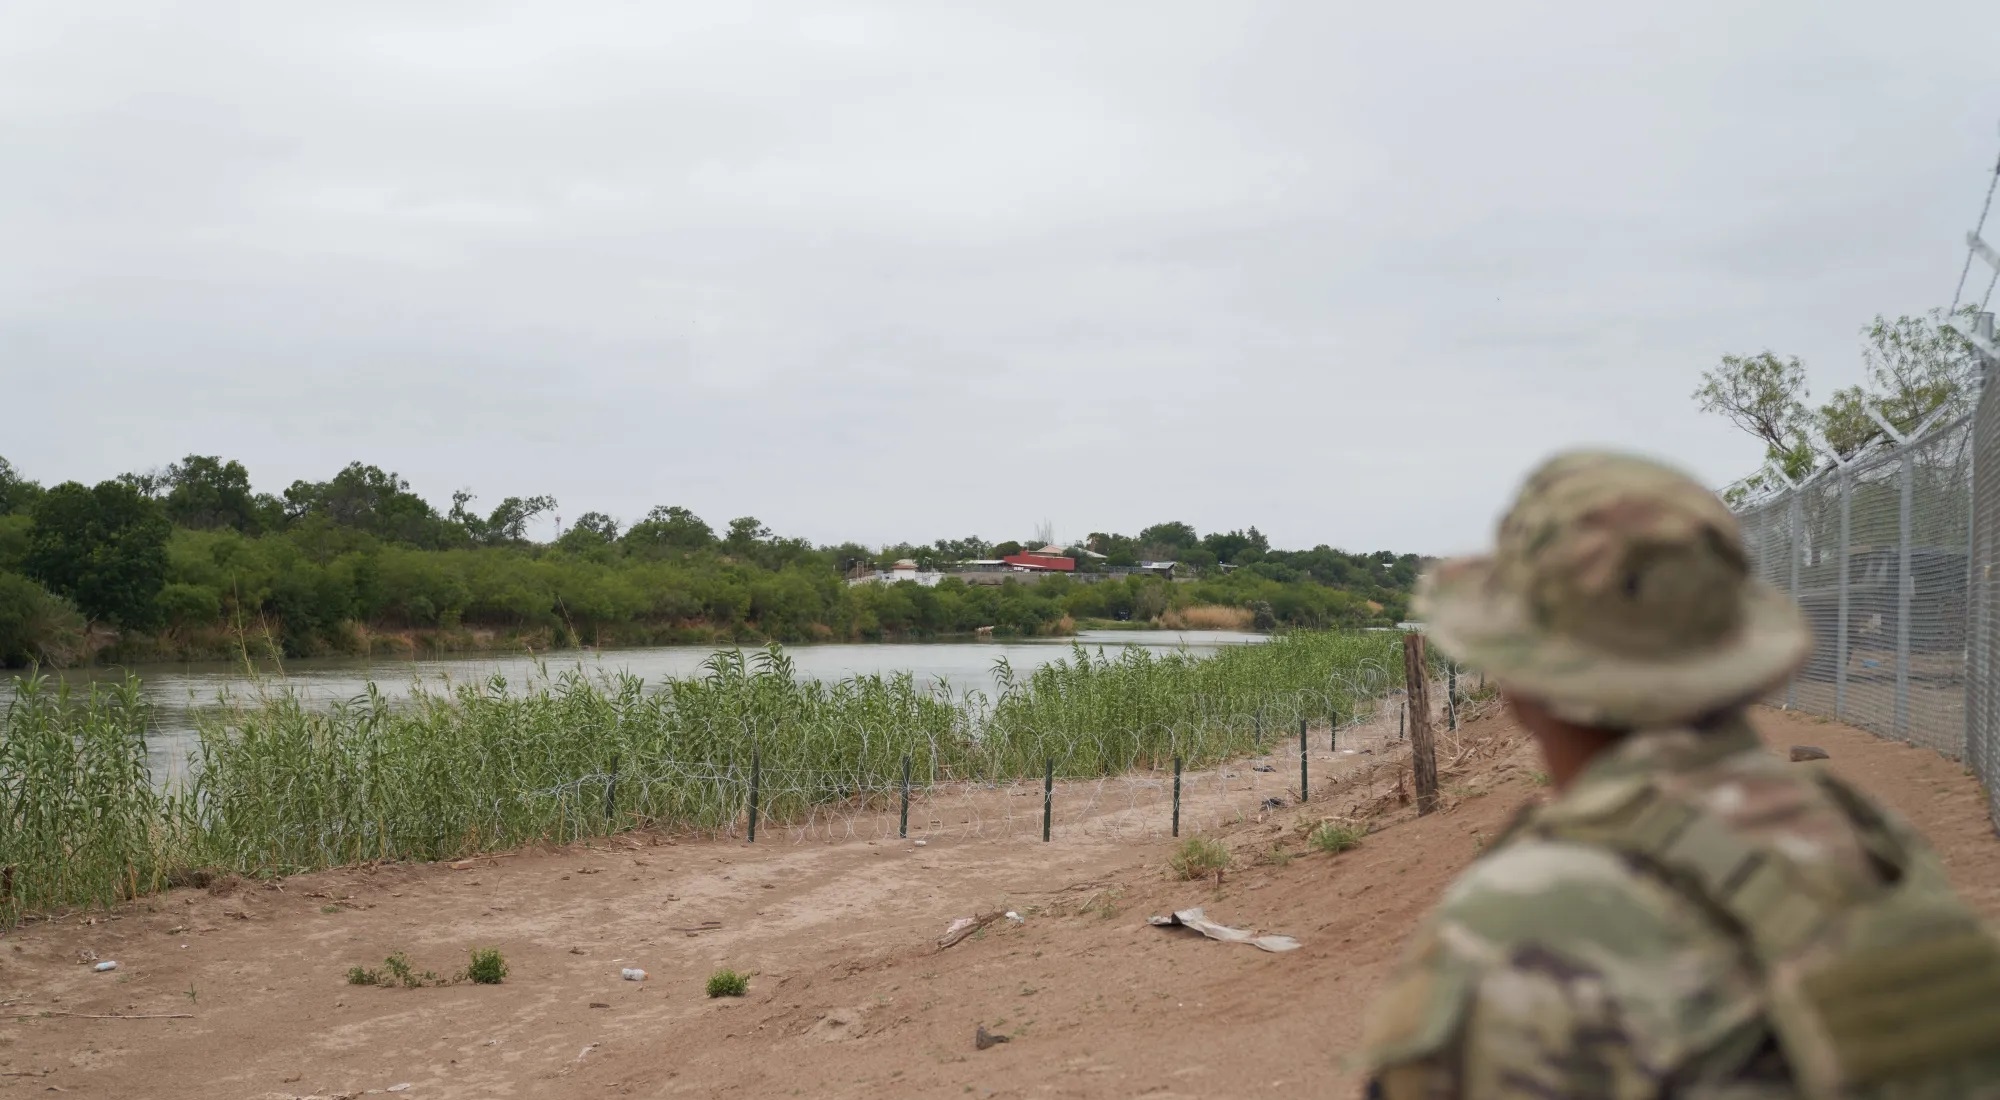 More Republican Governors Send National Guard Troops to Texas Border